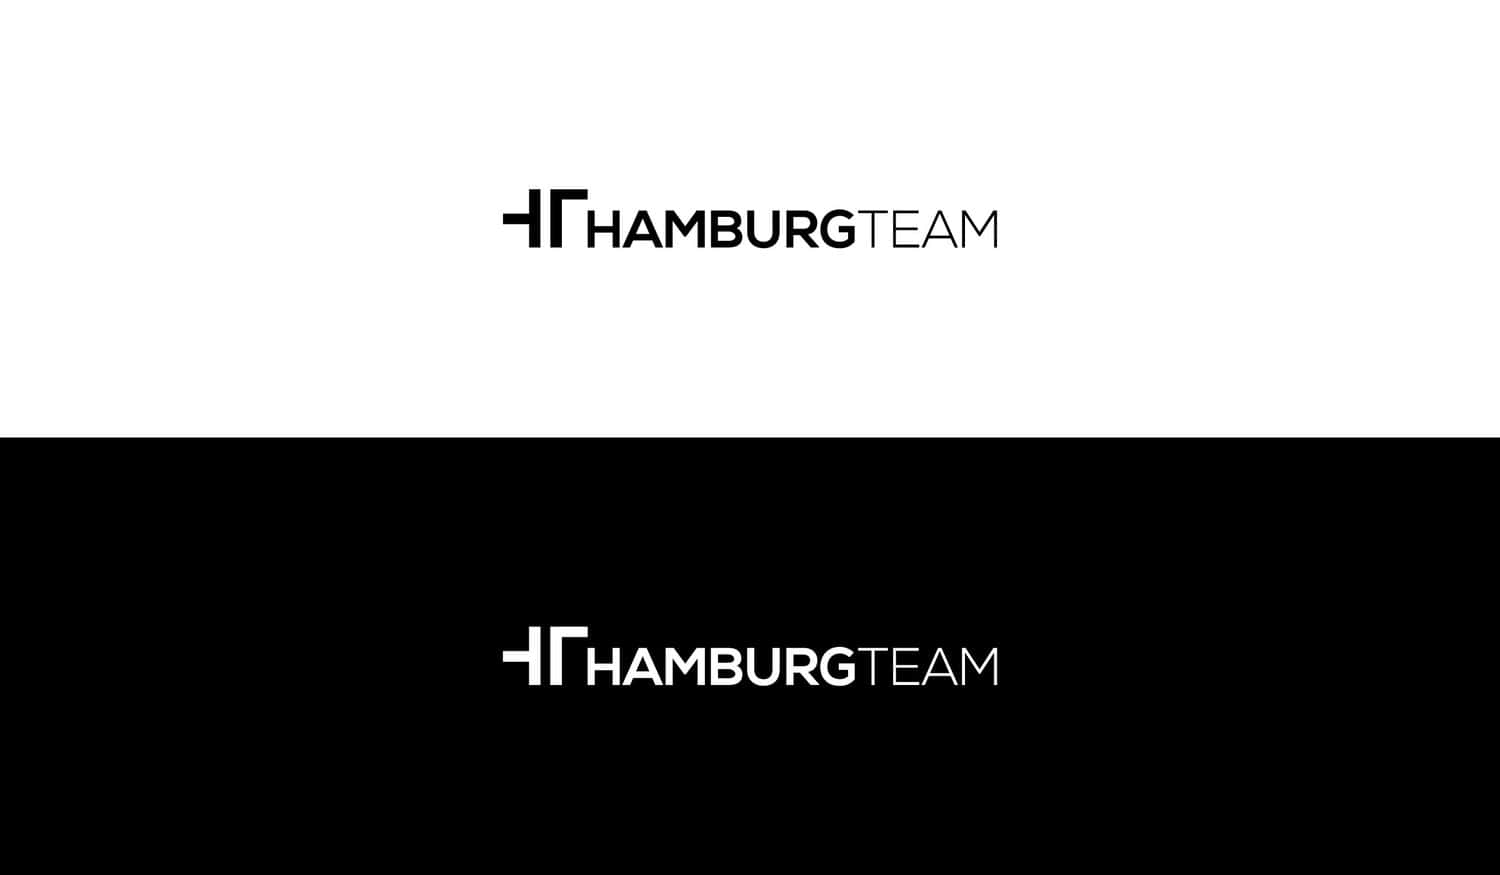 Corporate Rebrand For A Real Estate Company Based In Hamburg